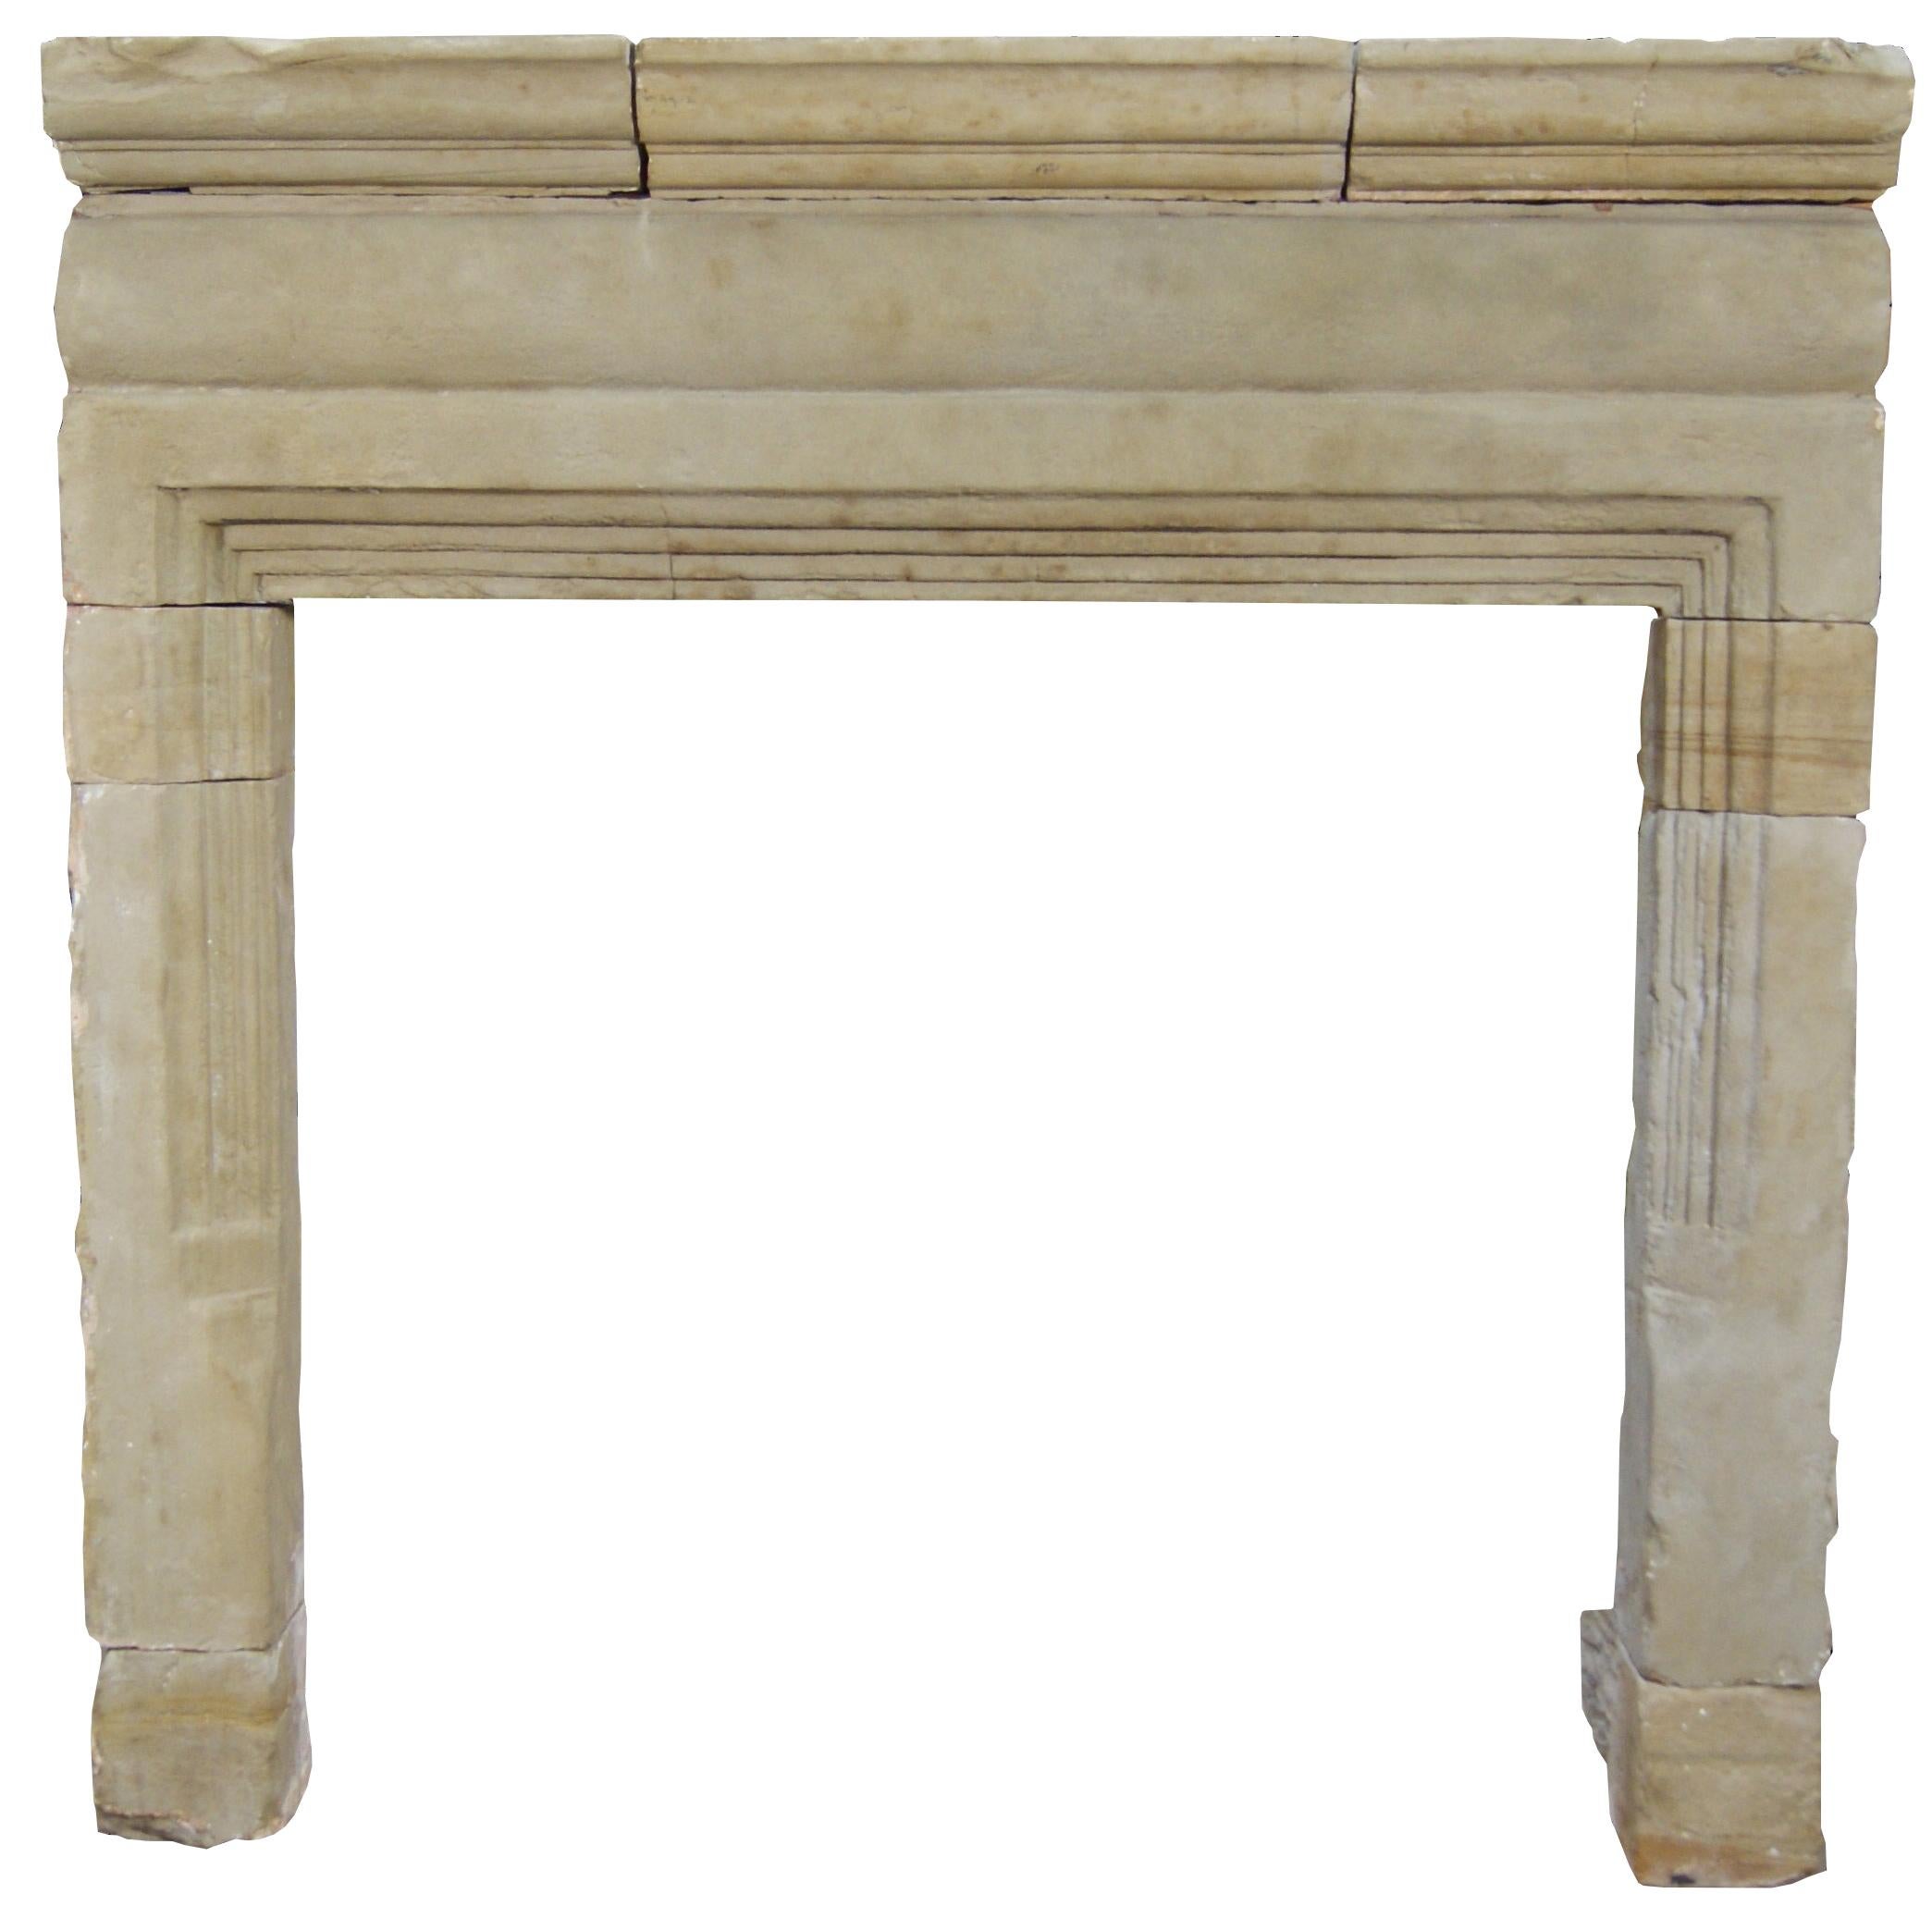 A rare 17th century (Charles II) English stone chimneypiece. The shaped jambs supporting a barrel frieze and moulded shelf. c 1660.

Please note that this fireplace was partially built into a wall. However, can be reduced in depth if